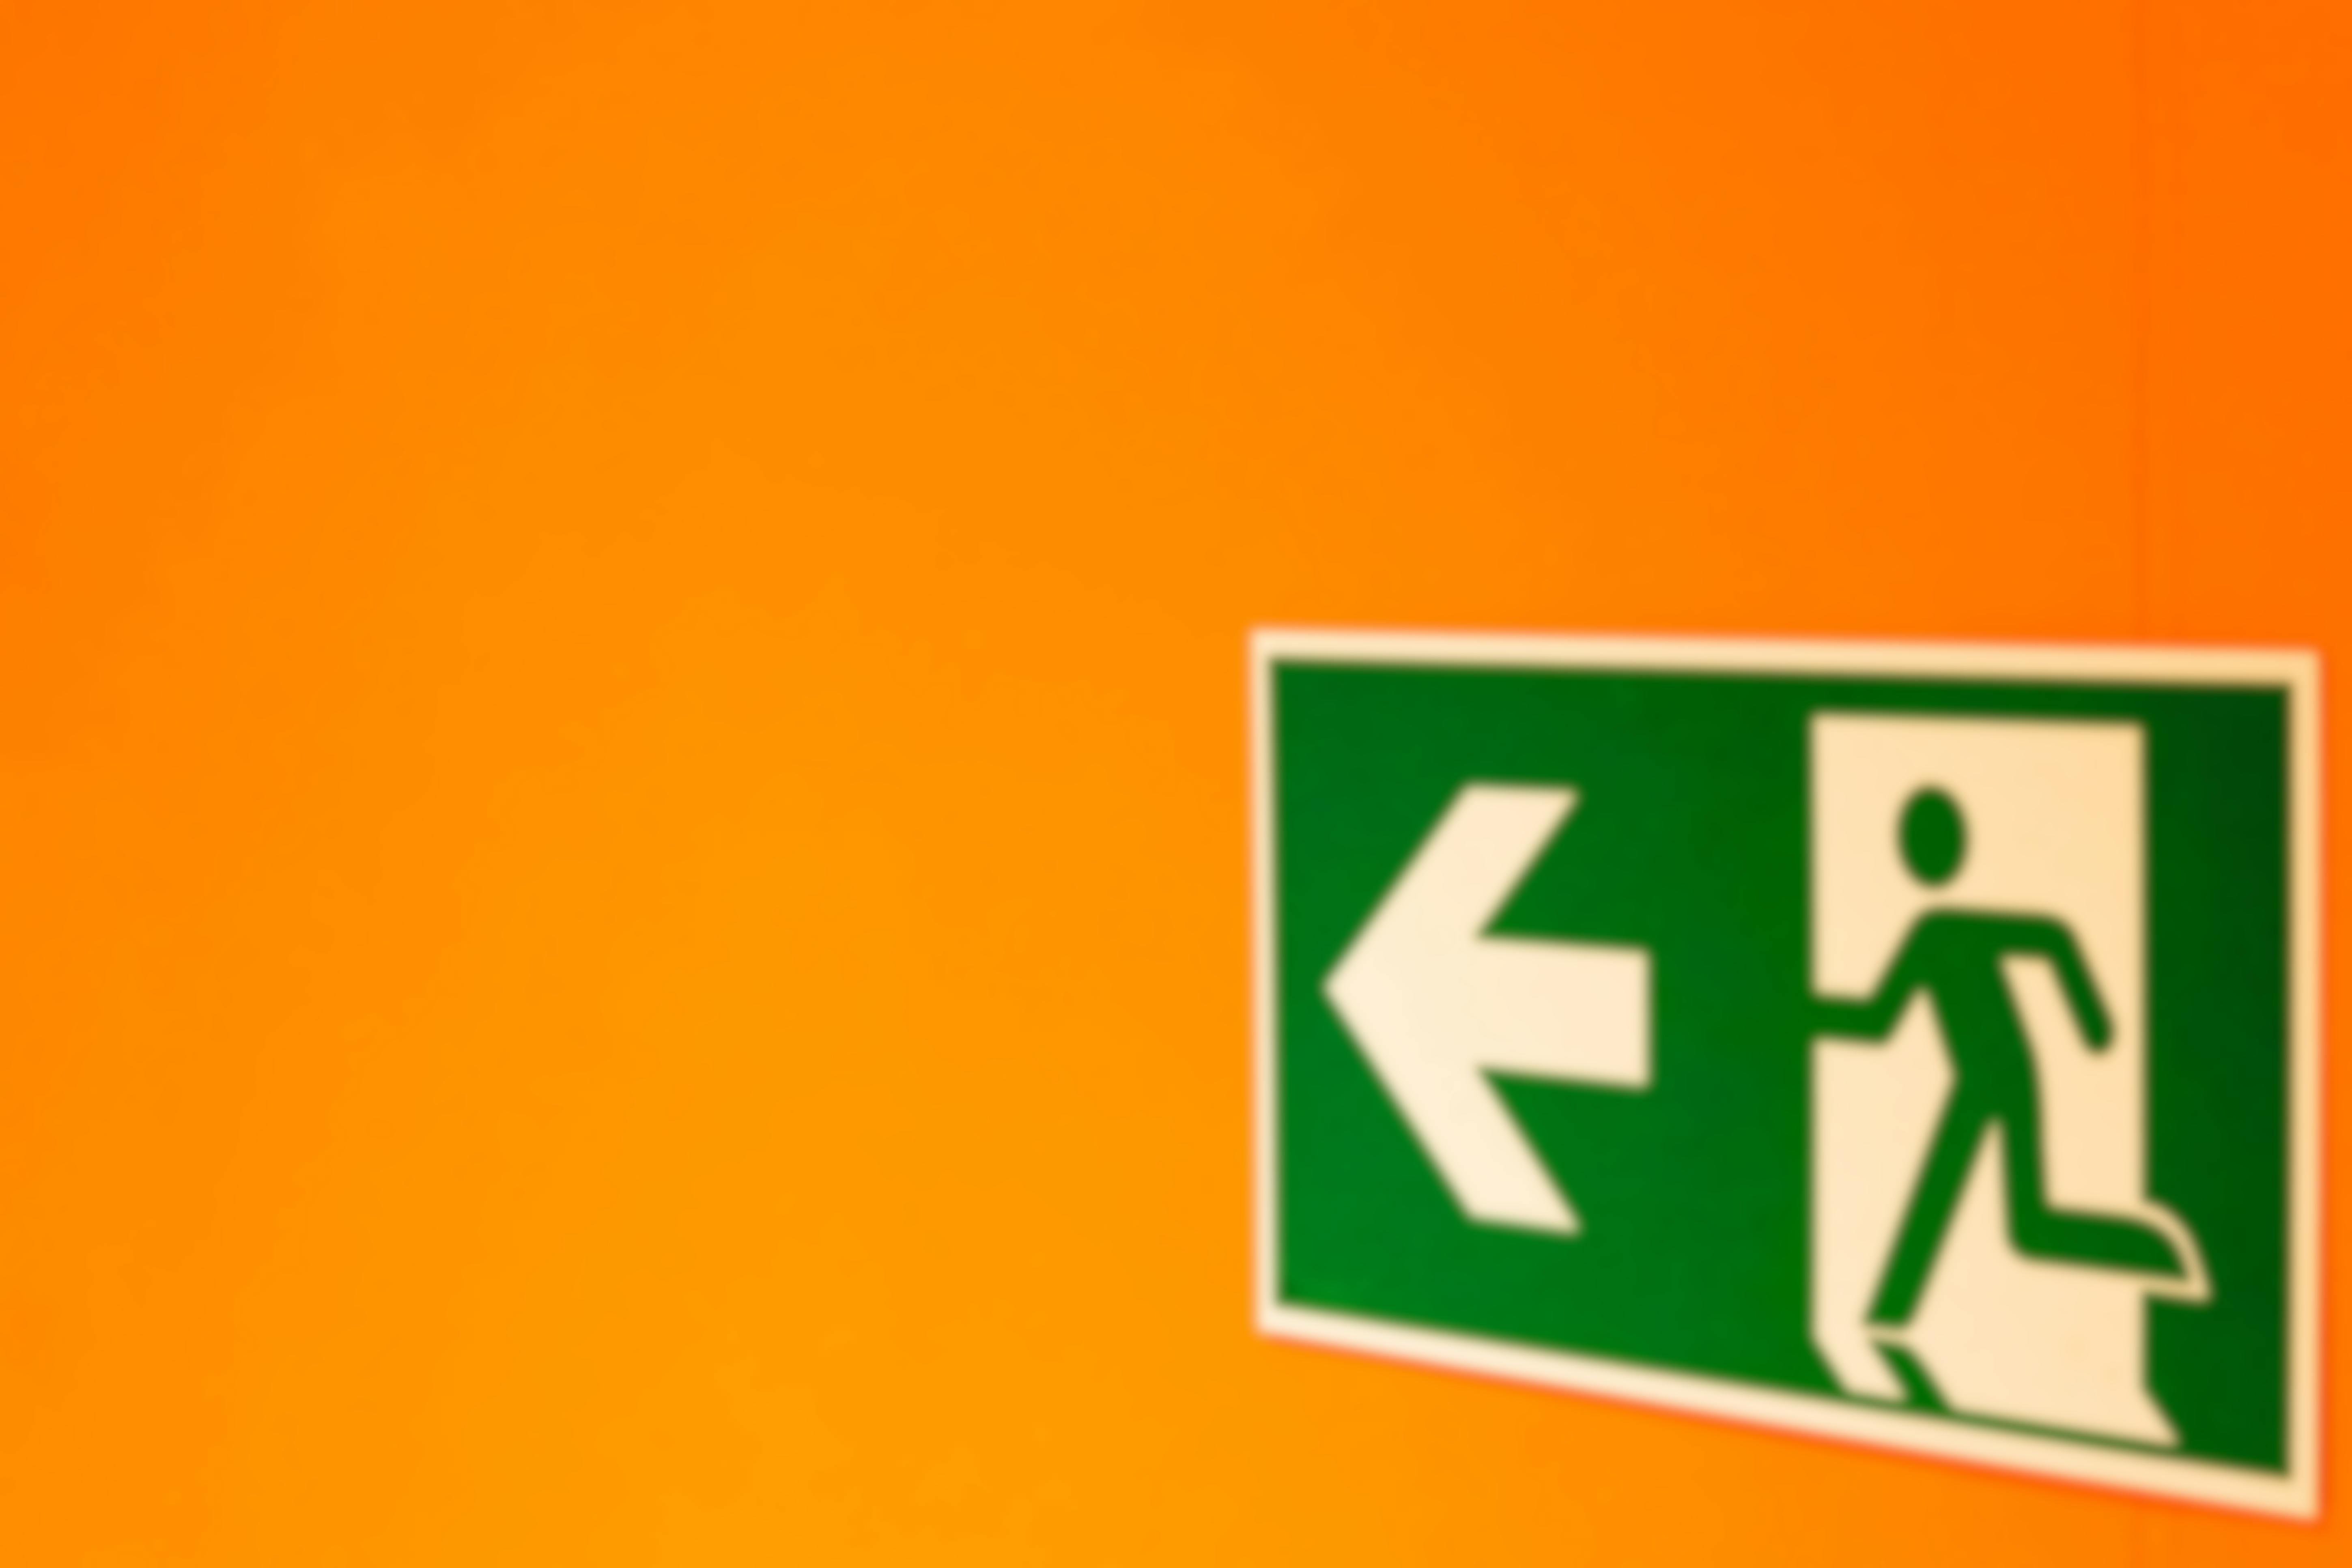 green exit sign on orange wall